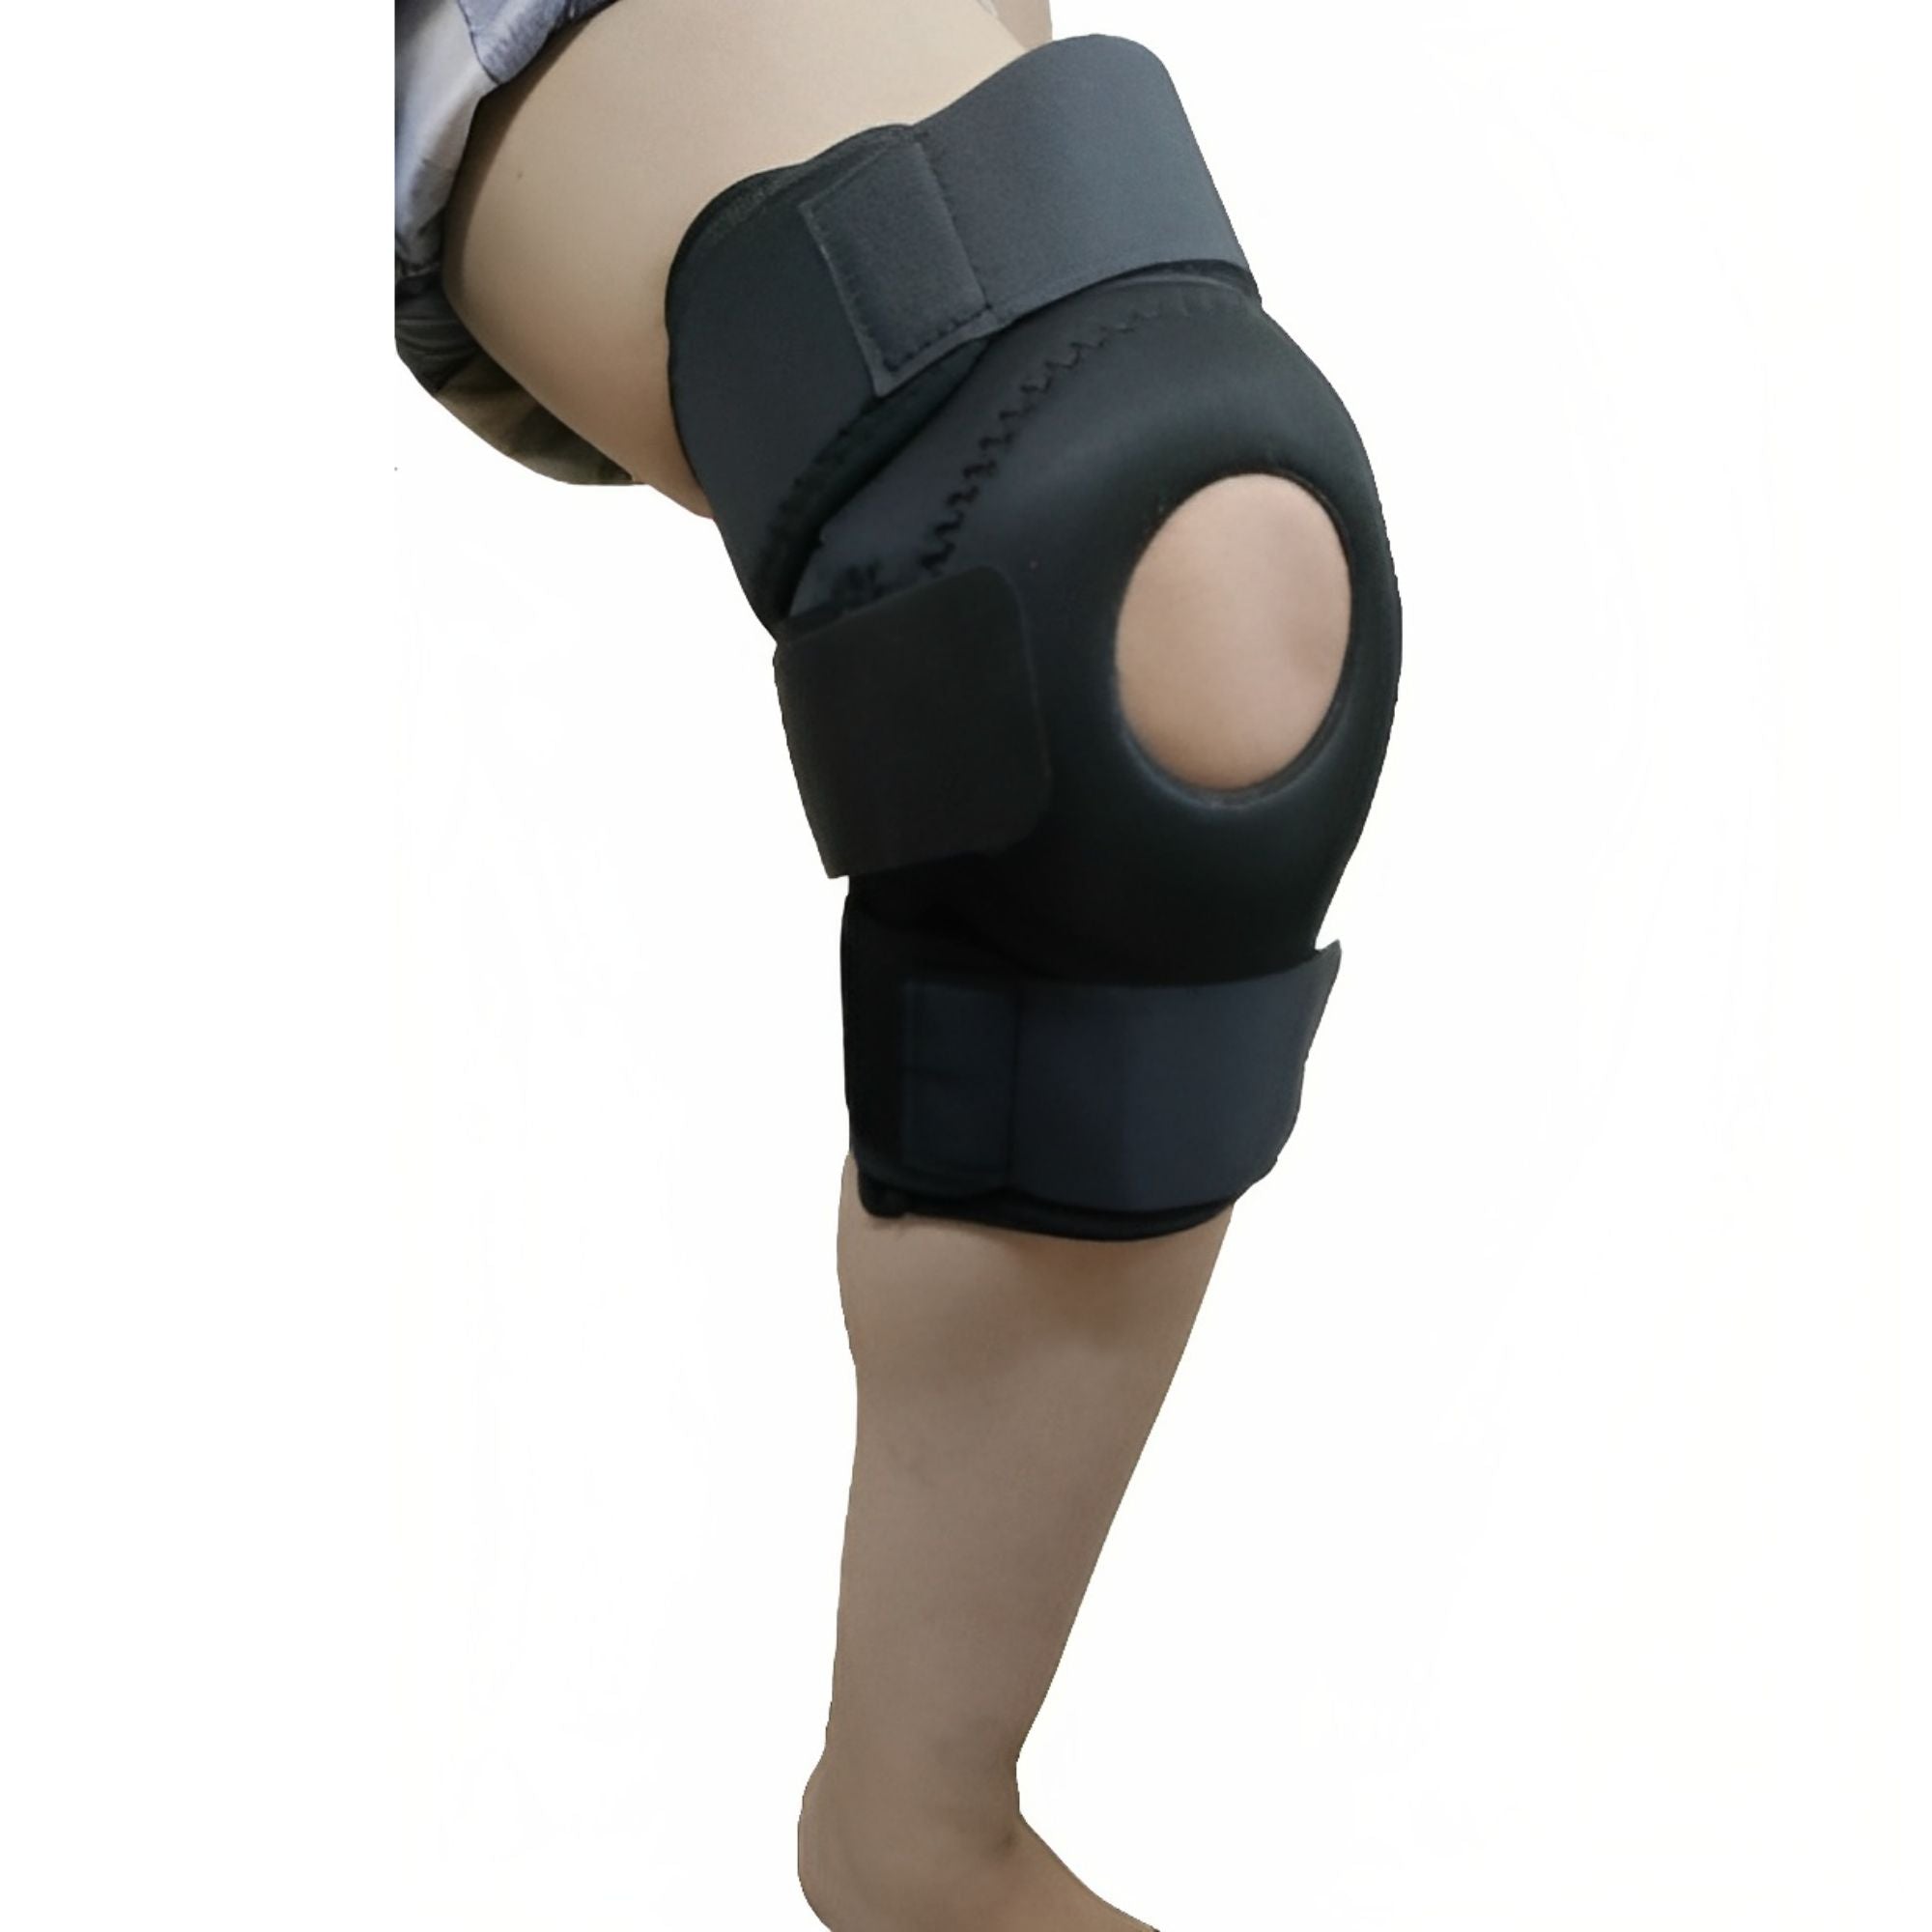 Sahyog Wellness Knee Support Patella With Breathable Knee Cap Brace fo